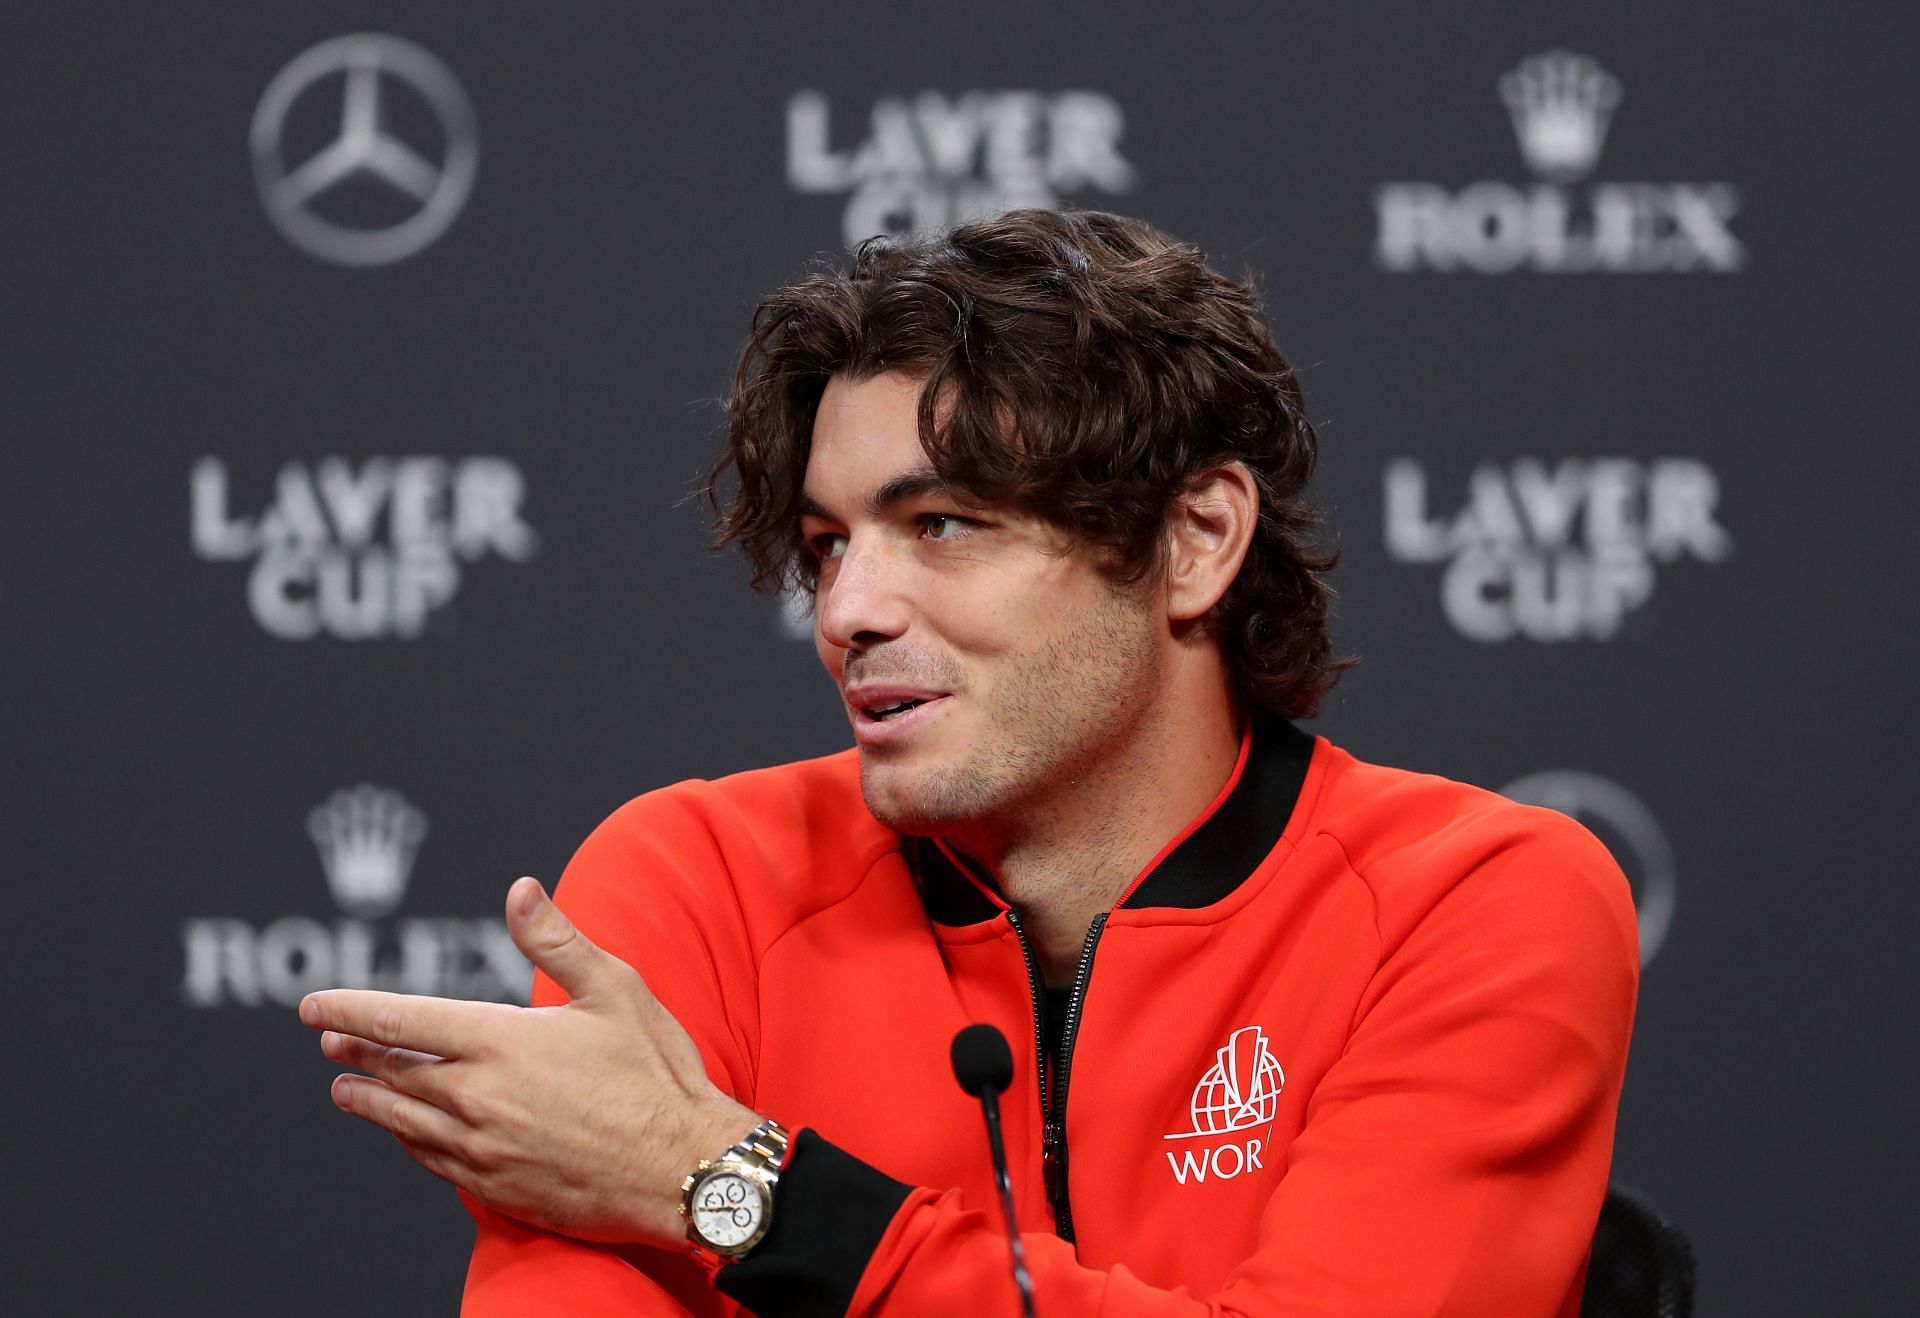 Taylor Fritz pictured at the 2022 Laver Cup.